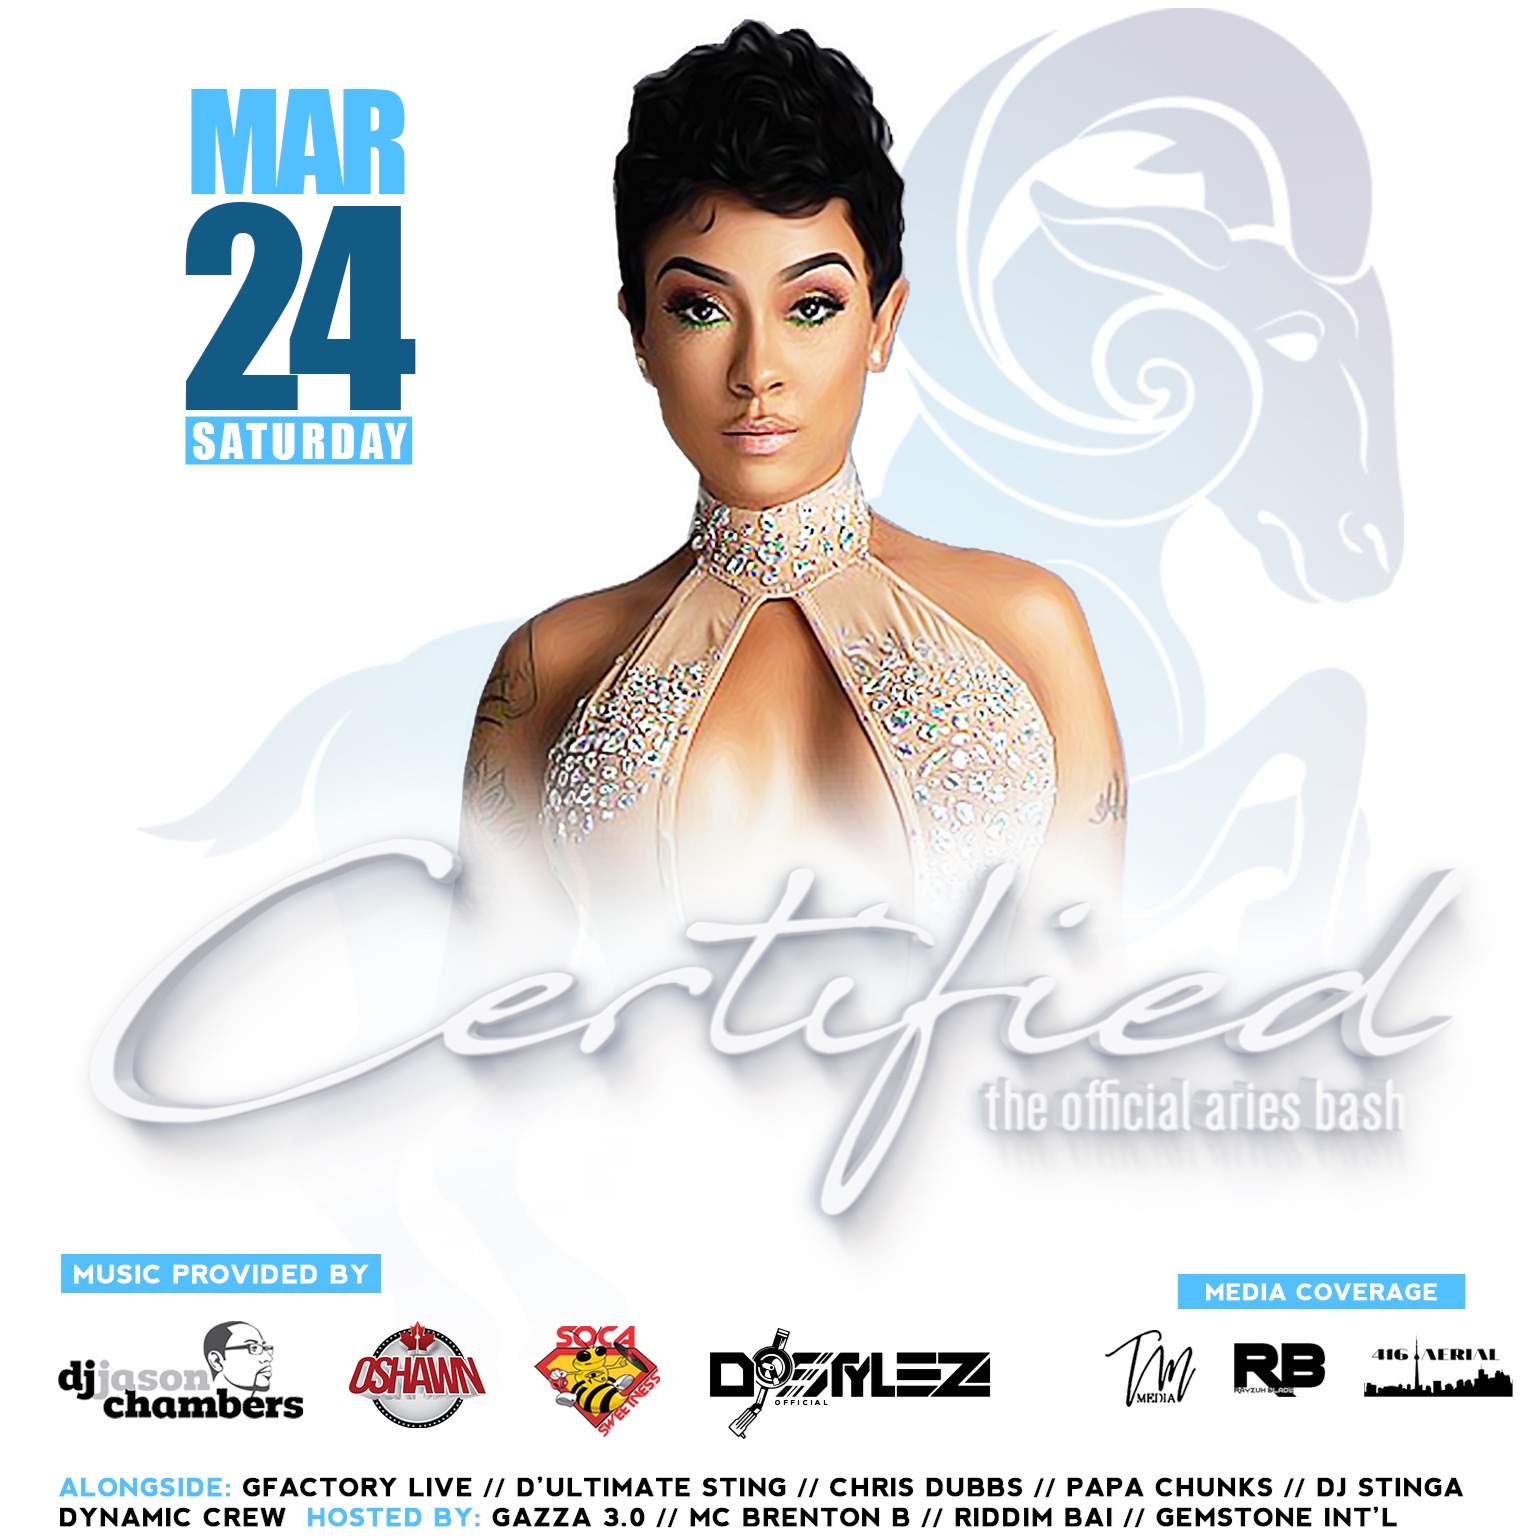 Certified - The Official Aries Bash